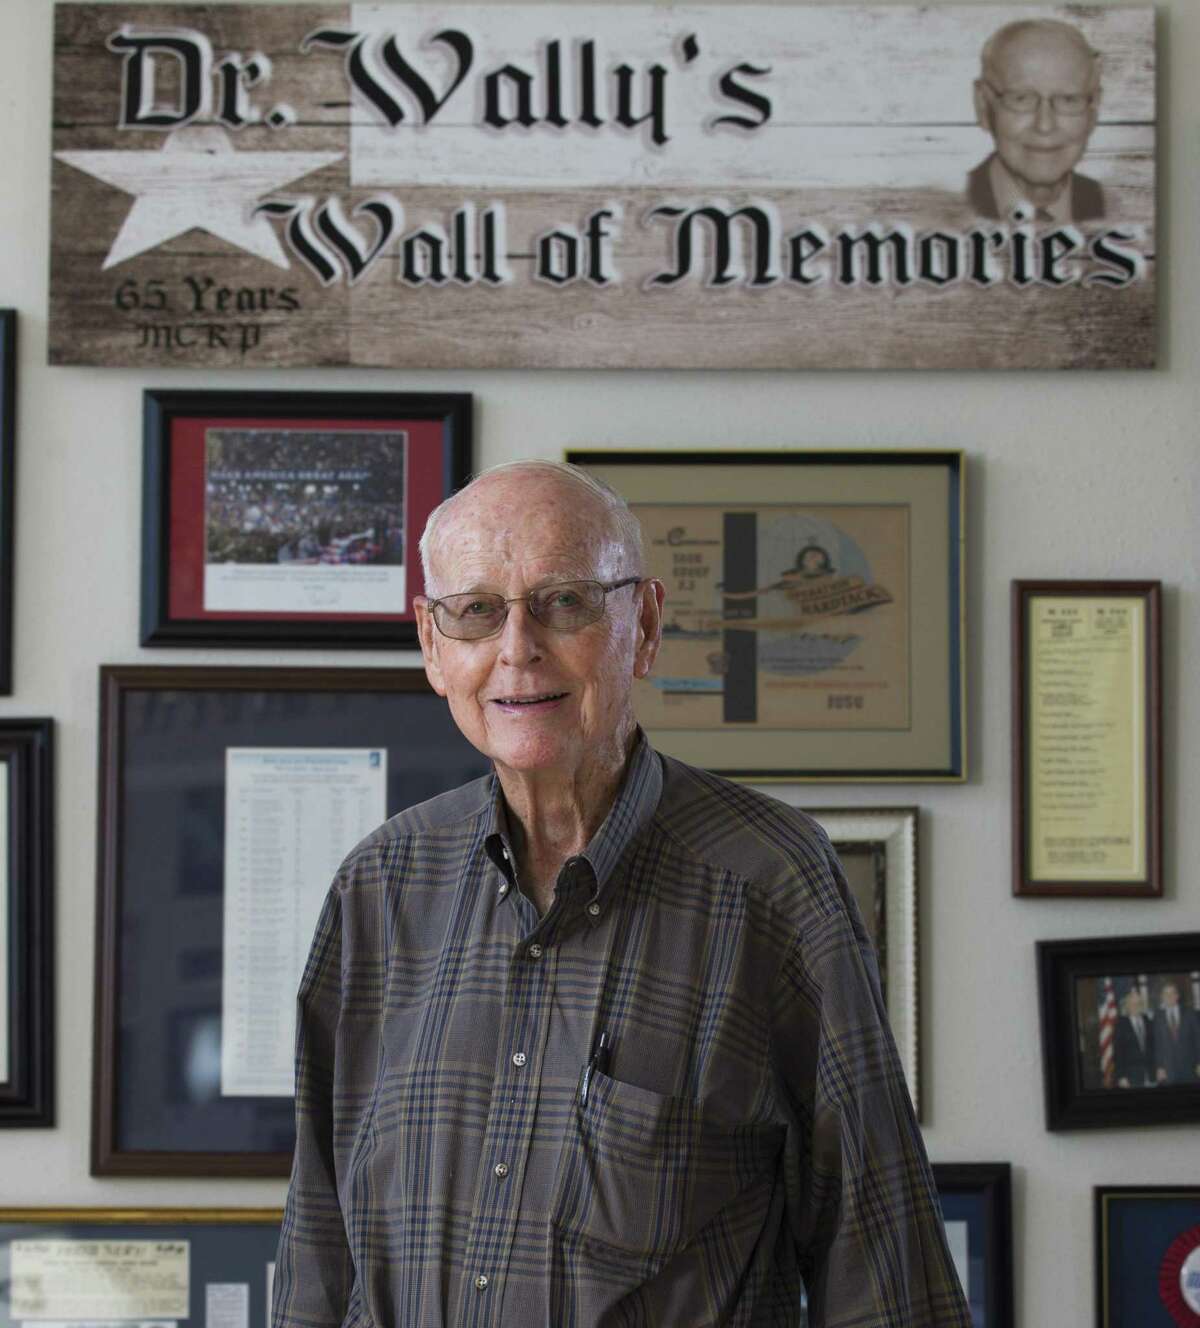 Montgomery County Republican Party Chairman Wally Wilkerson poses for a portrait in front of his wall of memories from more than 50 years as chairman at the Montgomery County Republican Headquarters, Wednesday, Dec. 5, 2018, in Conroe.